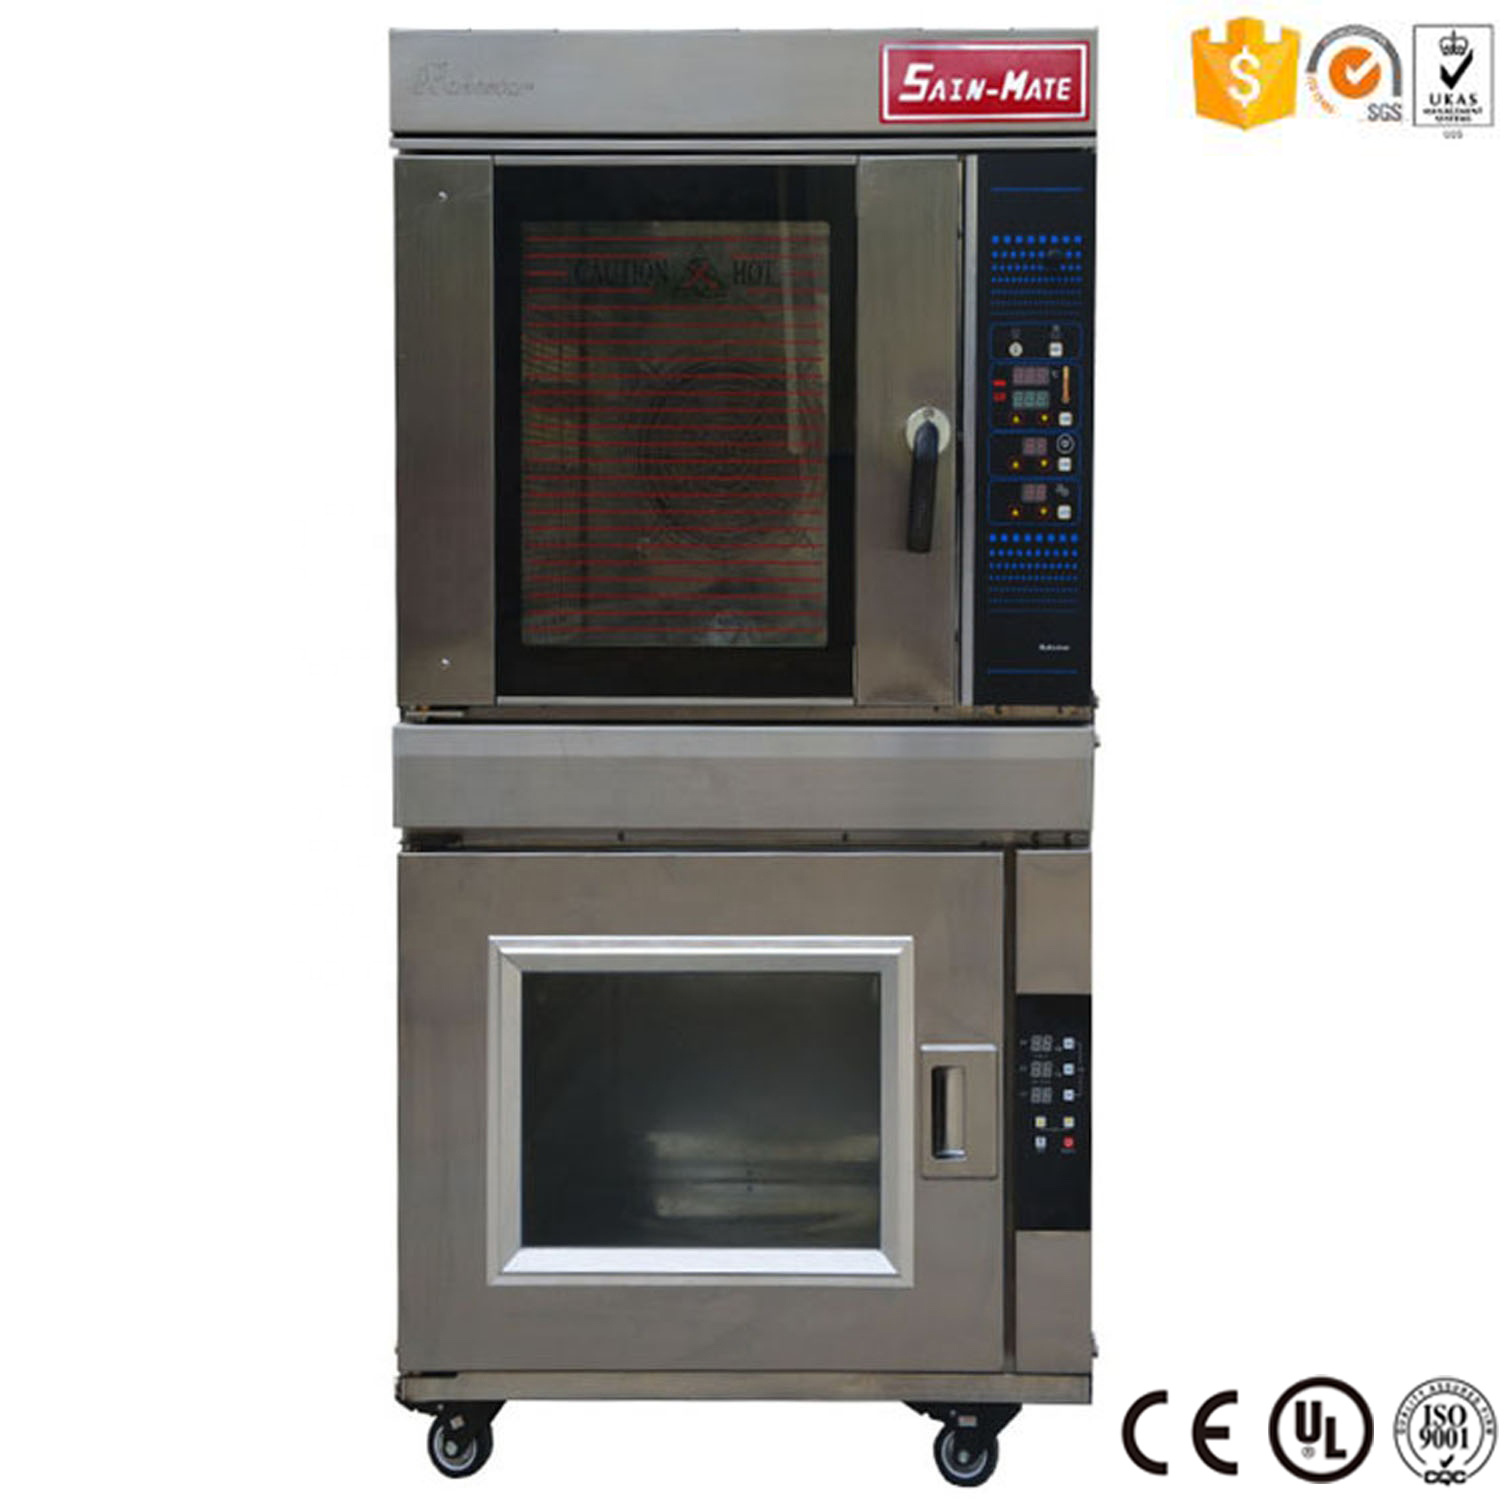 convection oven + proofer